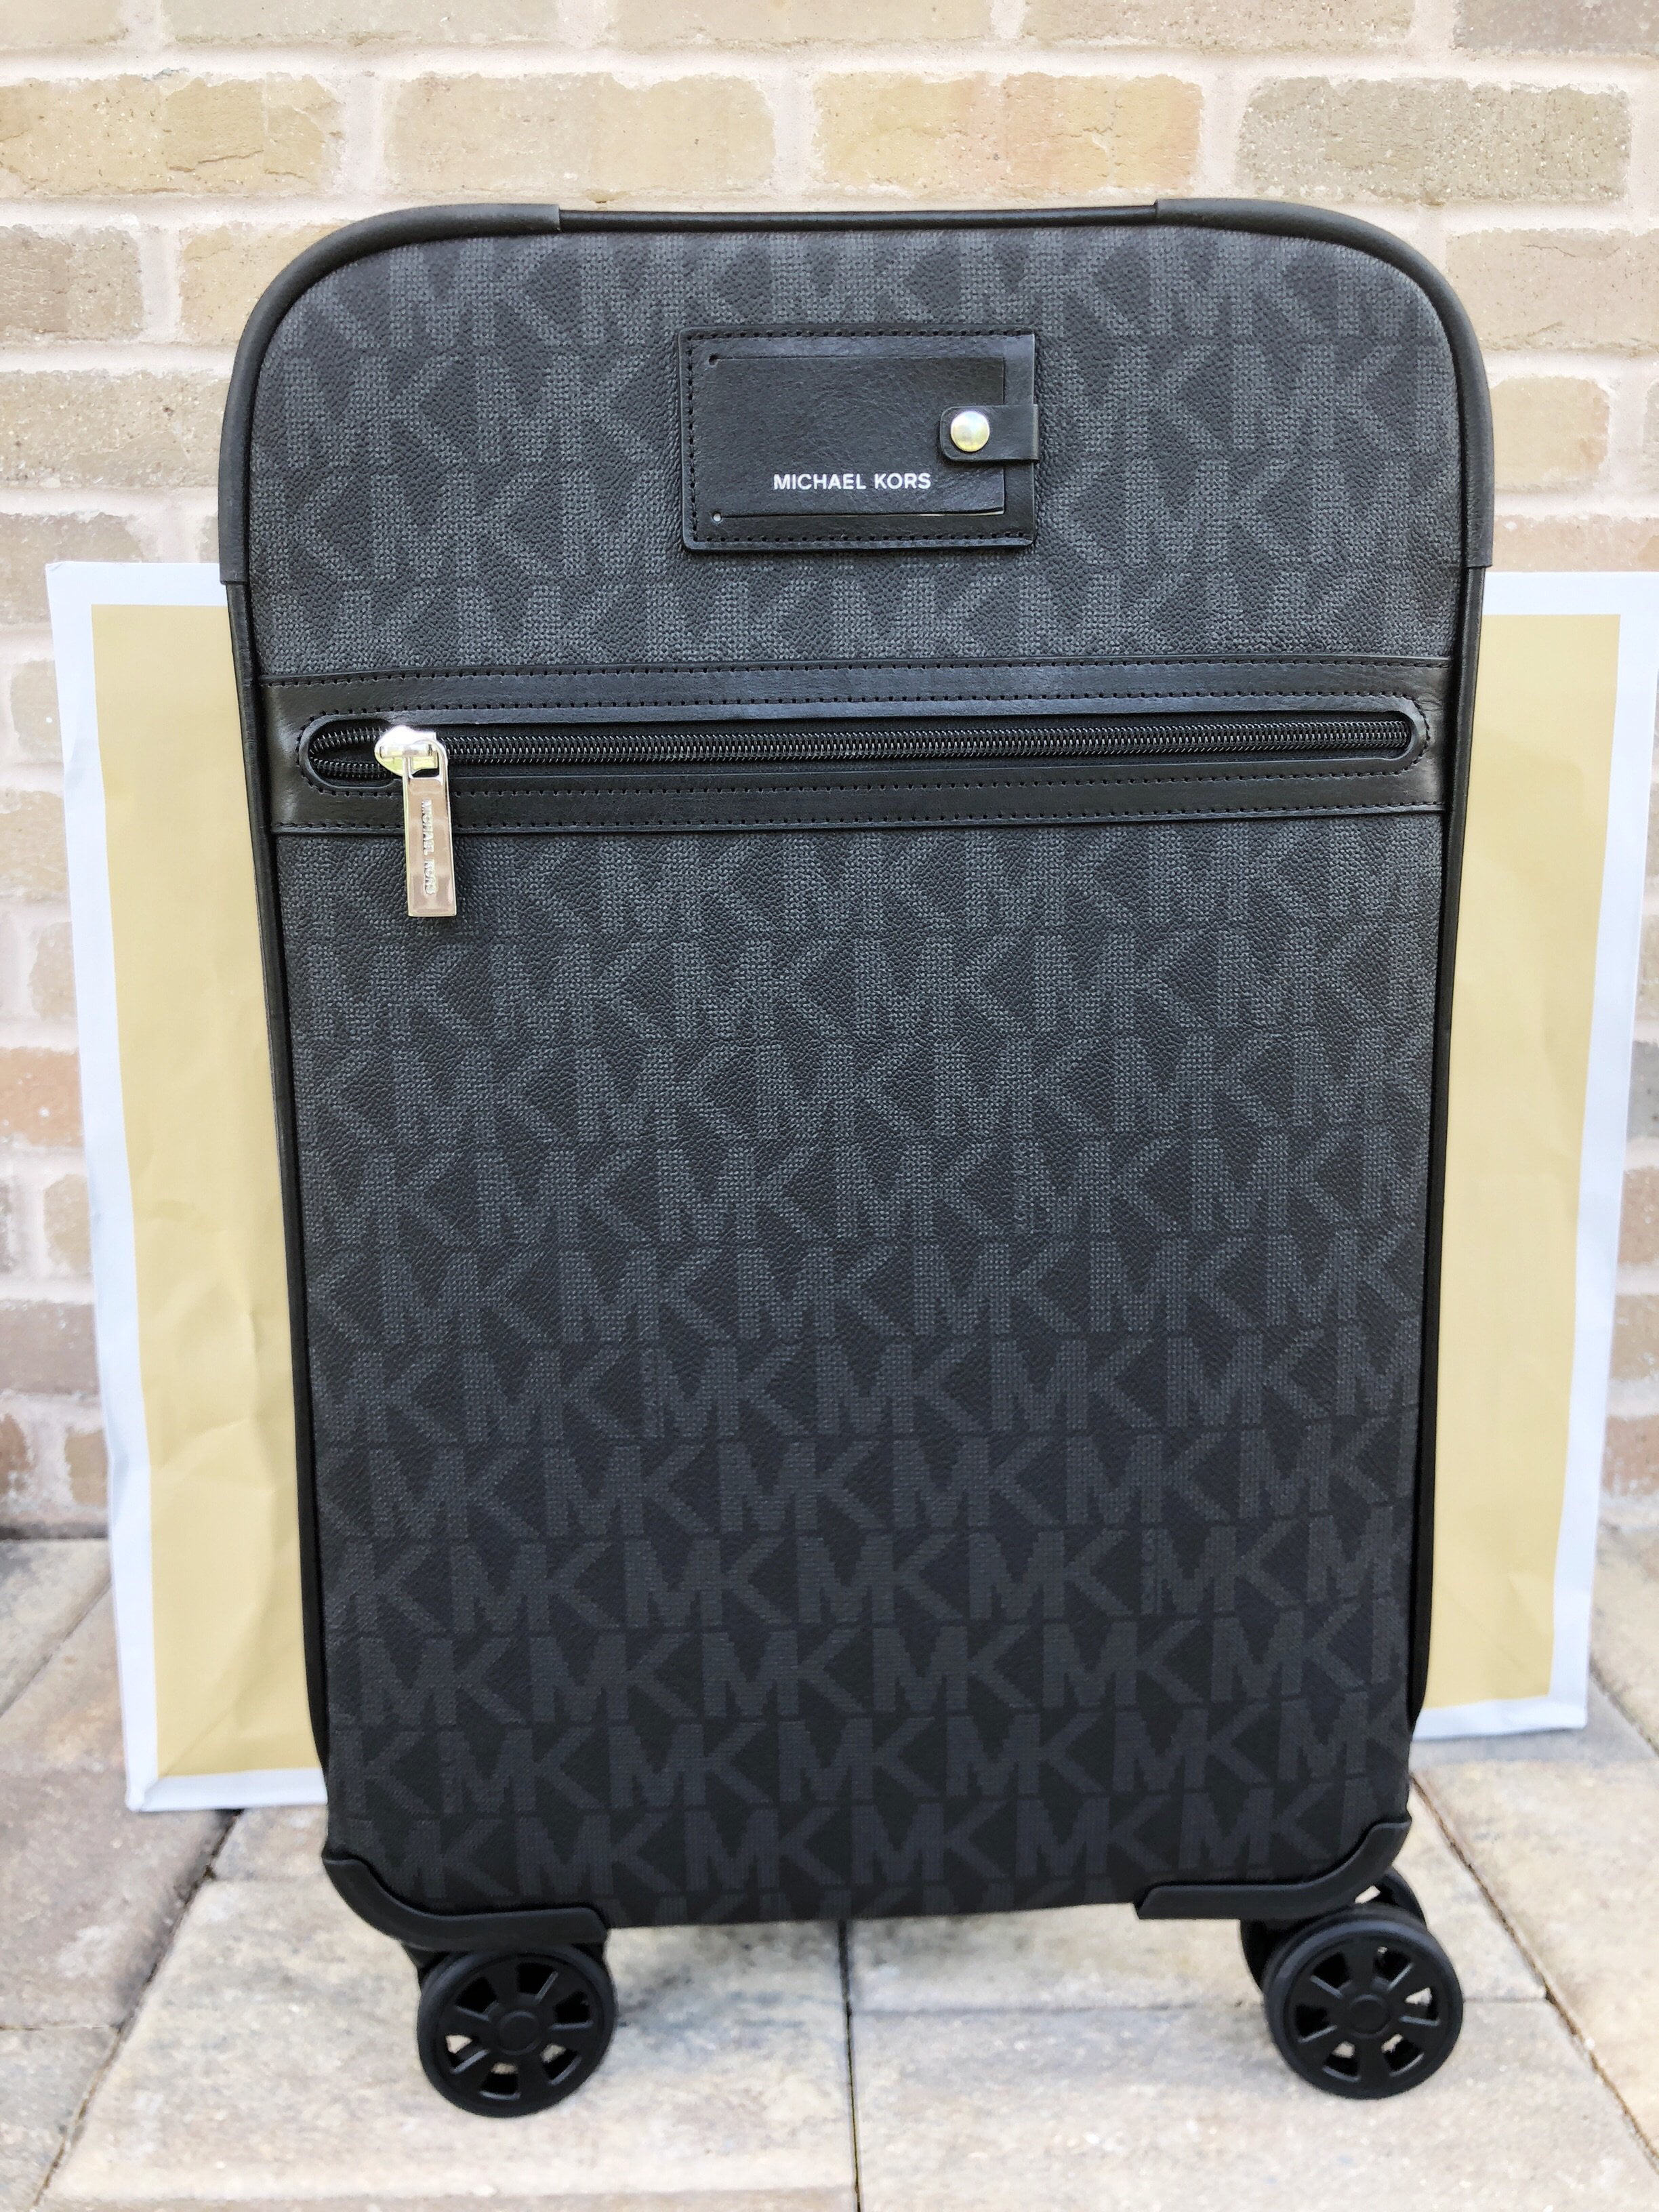 michael kors carry on luggage with wheels